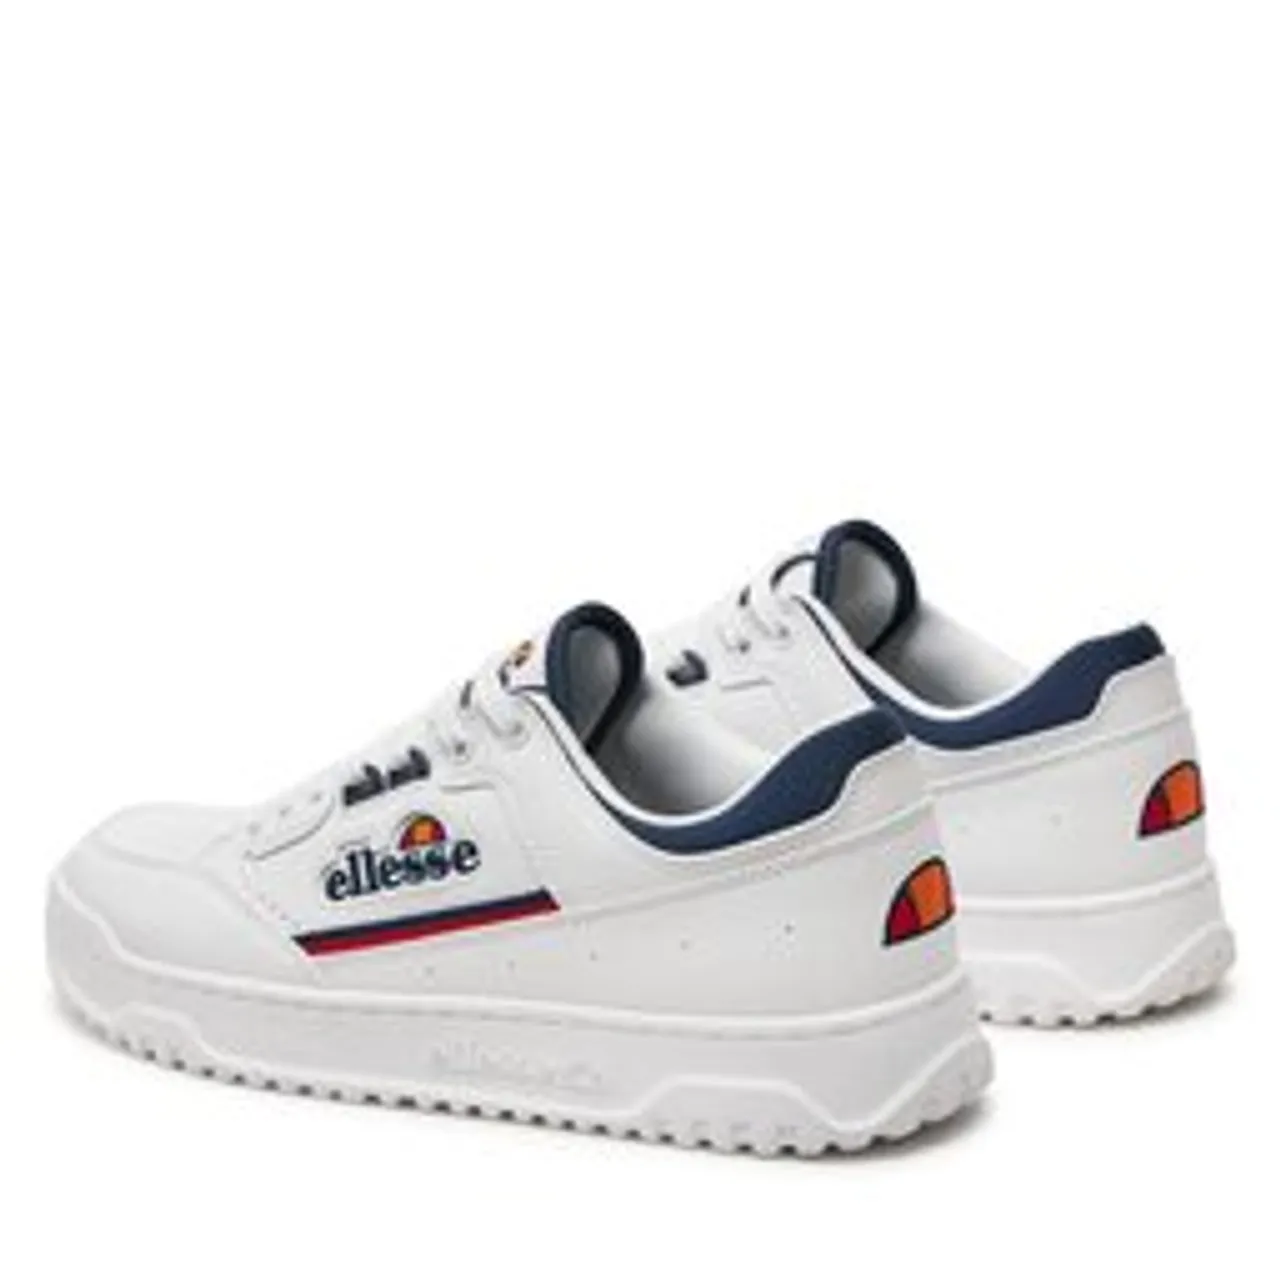 Sneakers Ellesse LS987 Cupsole SHVF0817 White/Navy 921